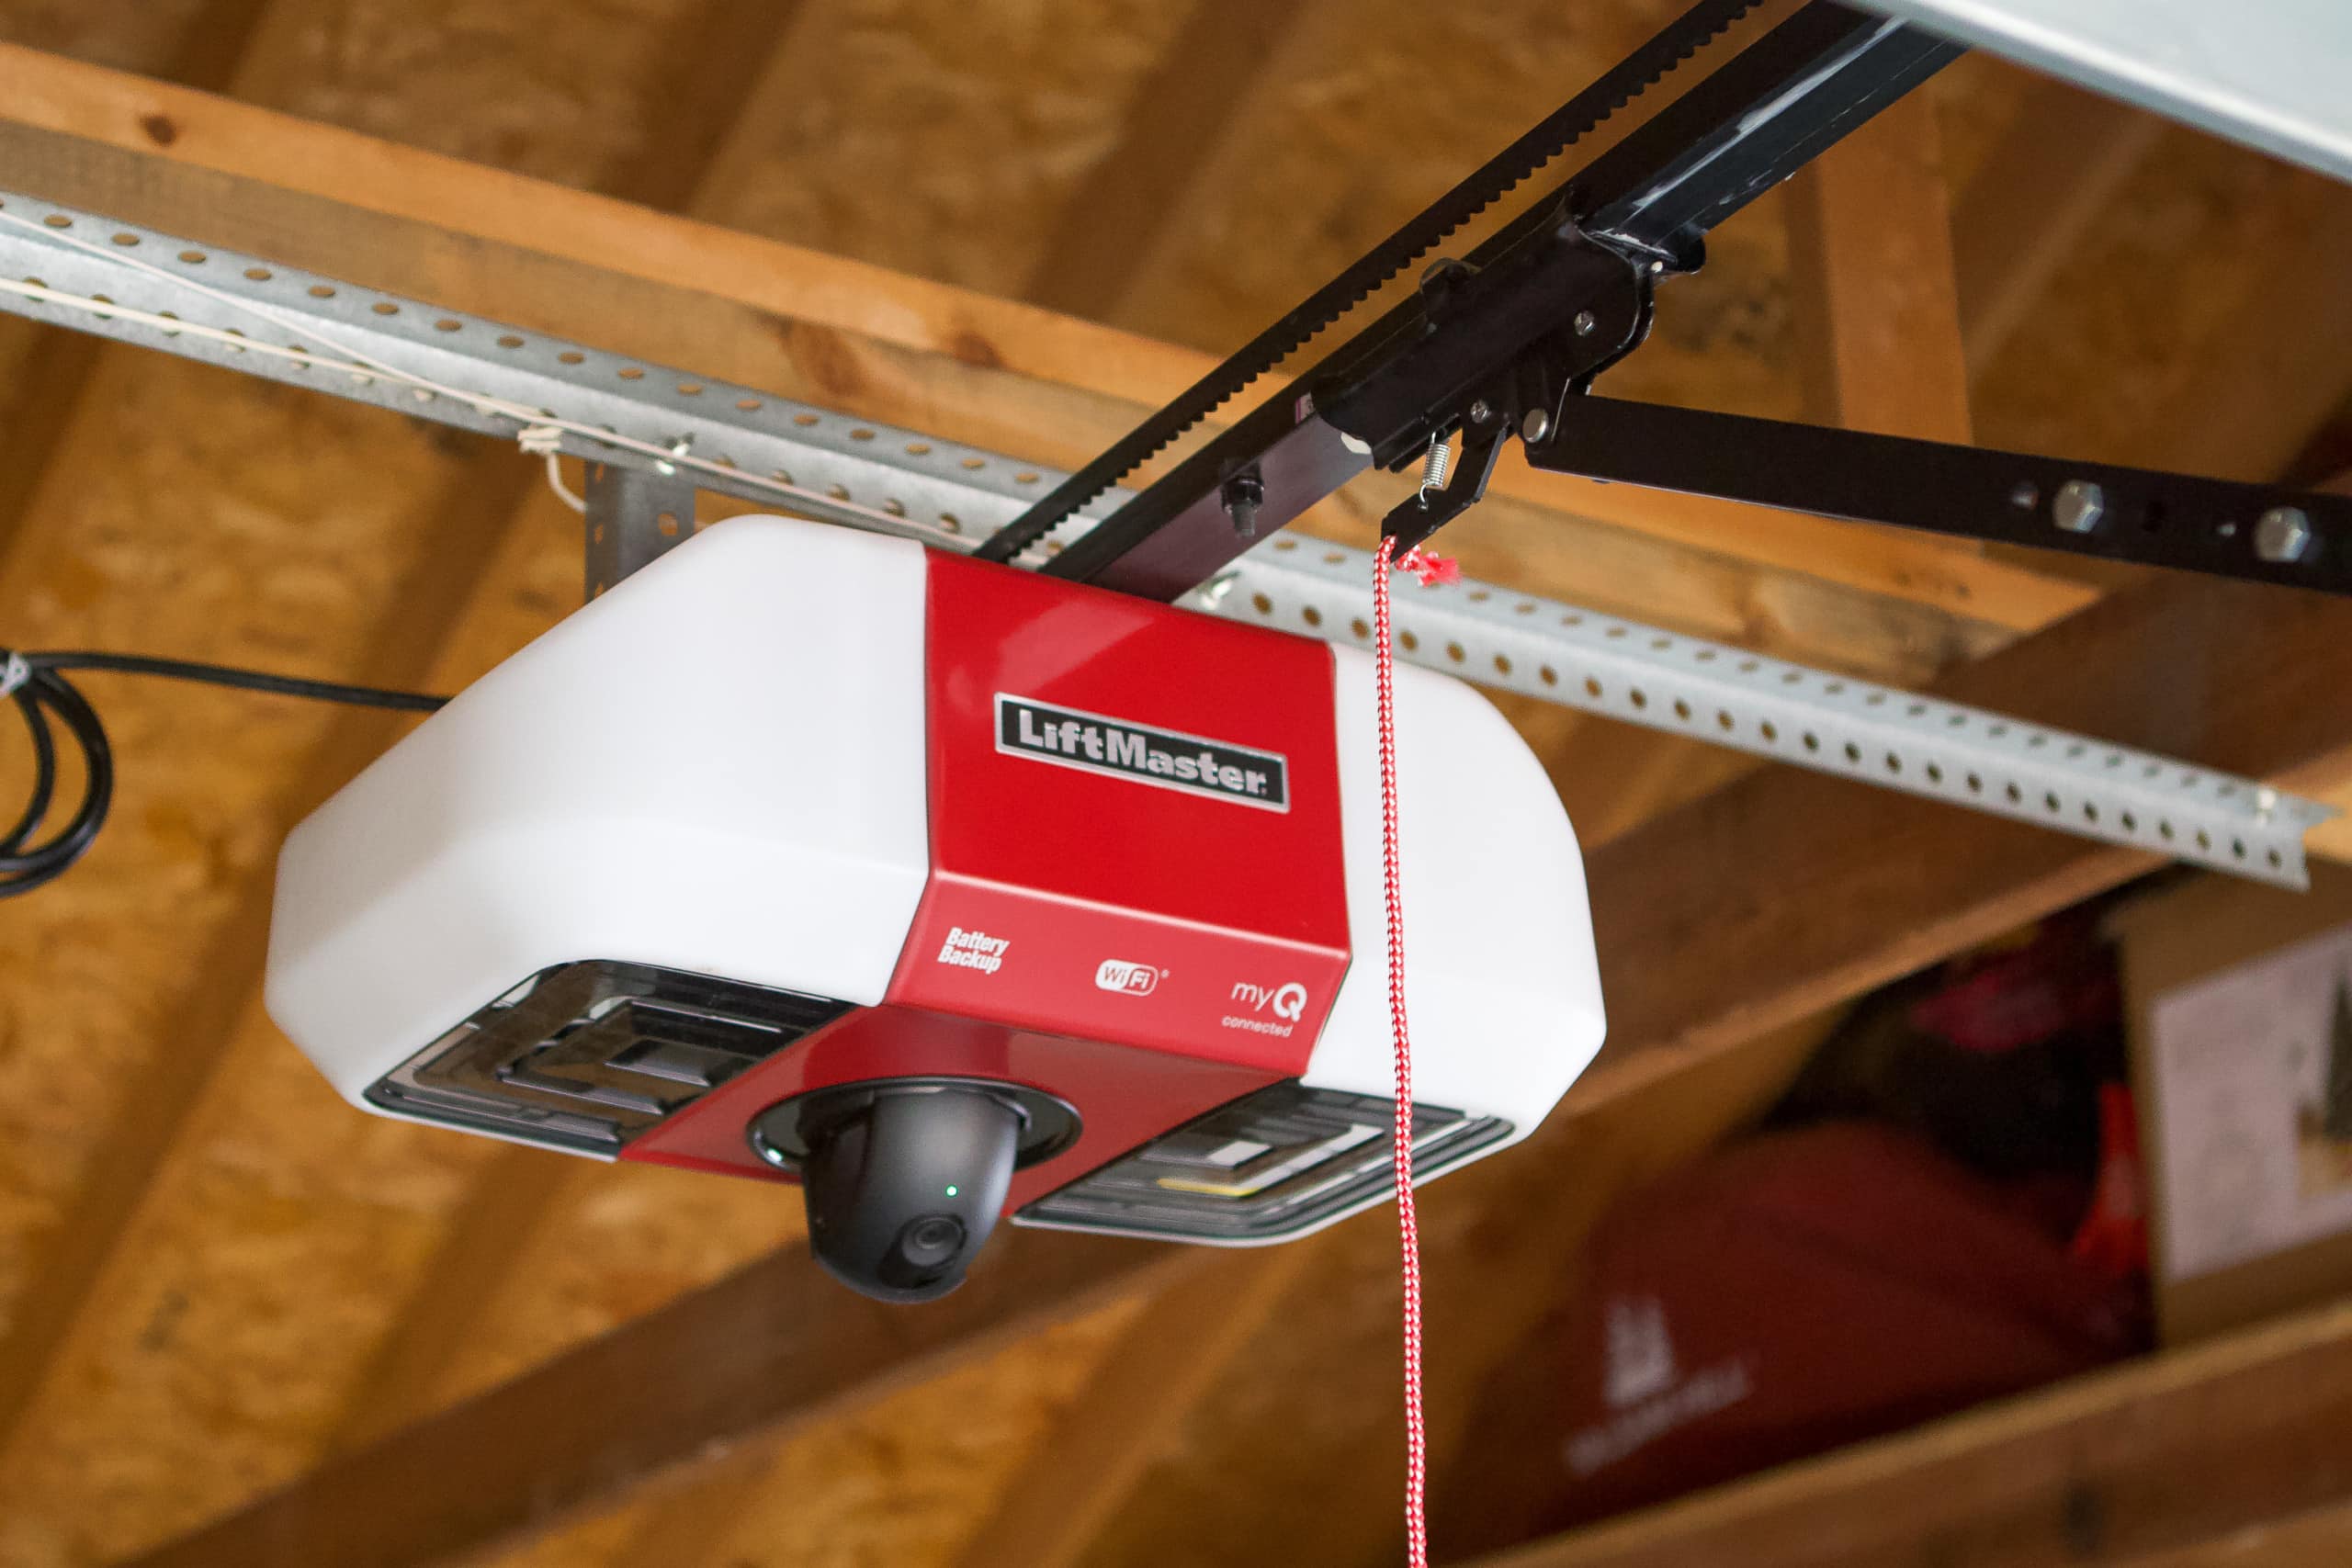 Why Your Liftmaster Garage Door Opener Hums But Doesn’t Move?